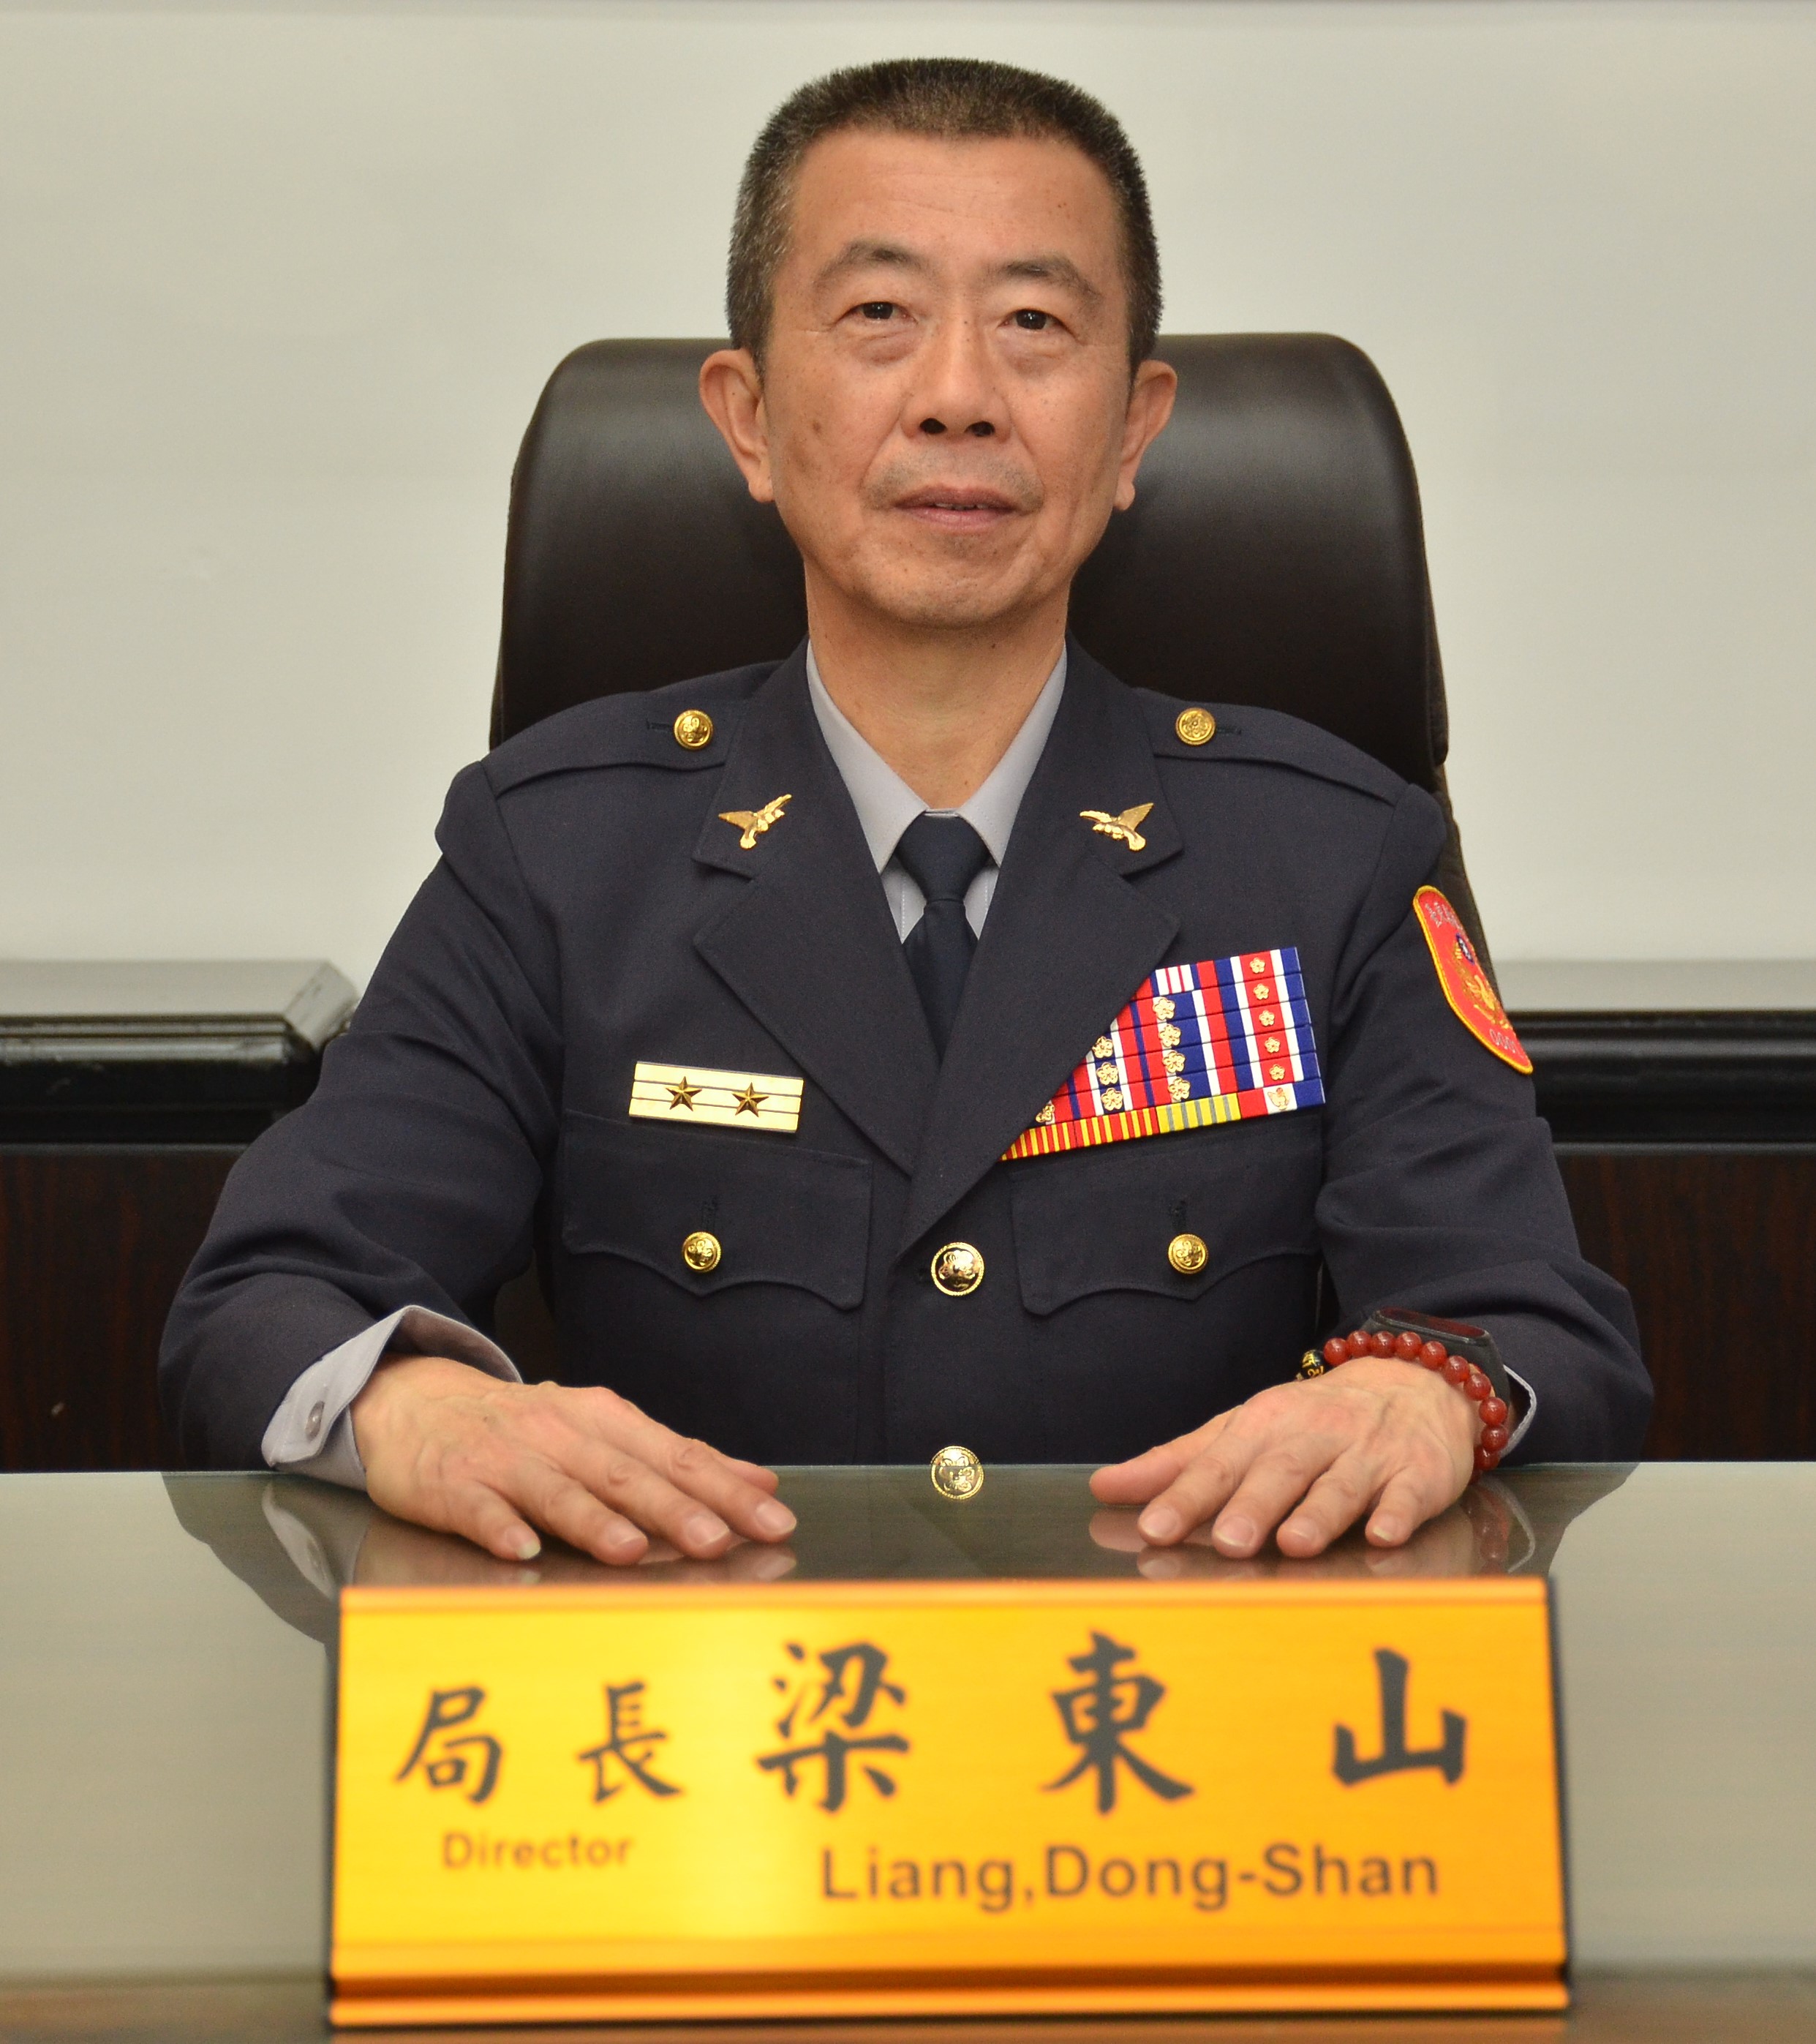 Commissioner LIANG,DONG-SHAN